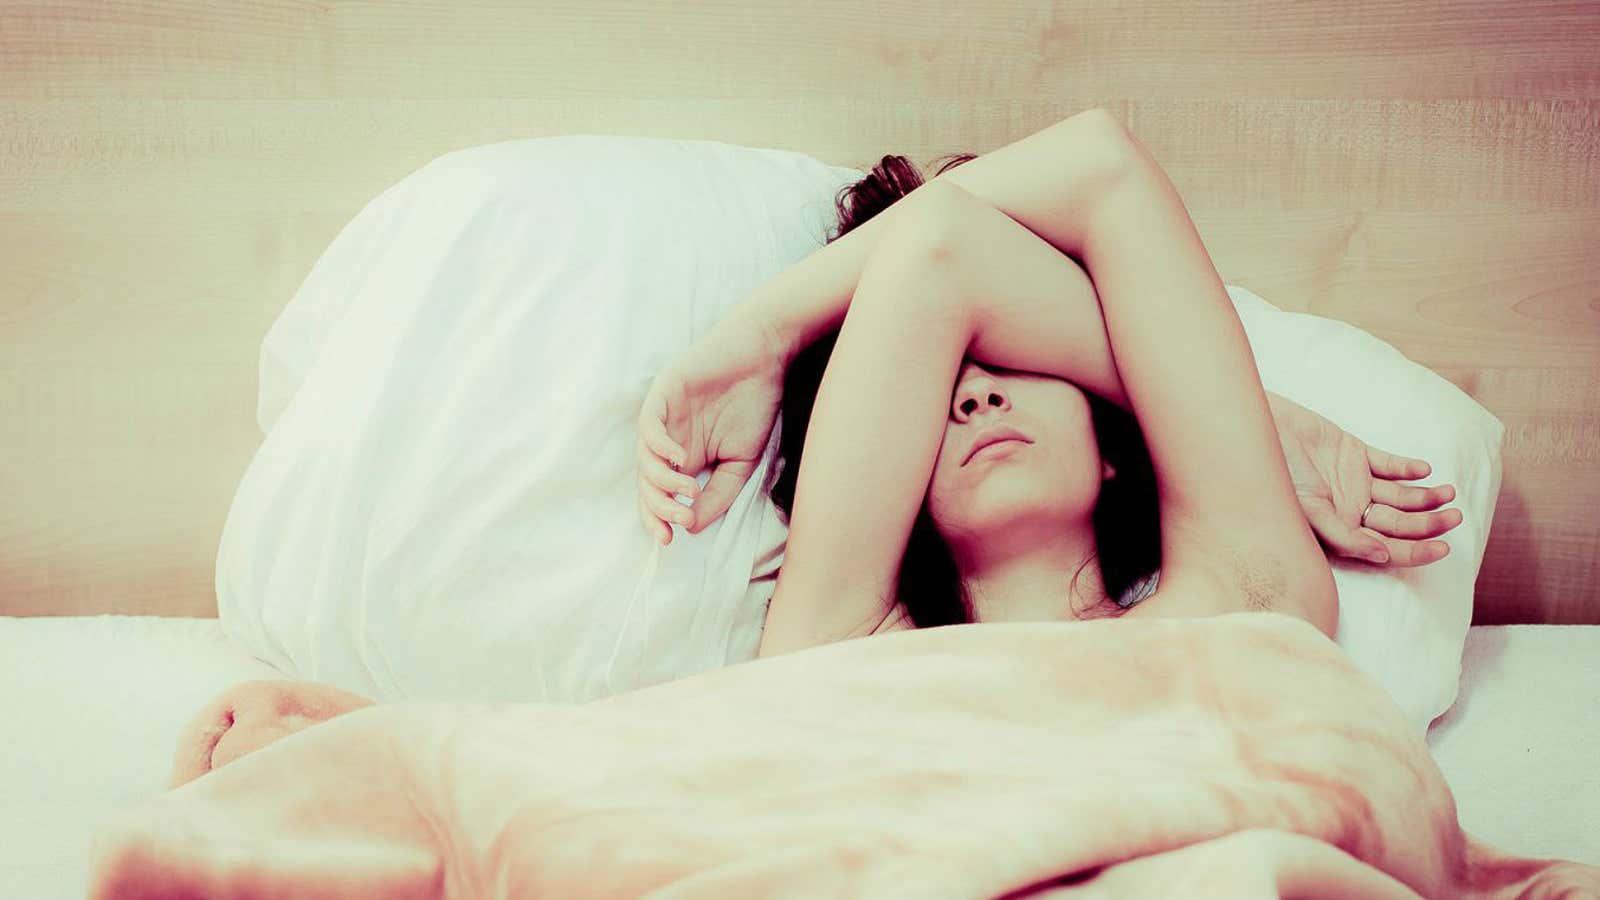 Believing you’ve had enough sleep can significantly affect how you feel.